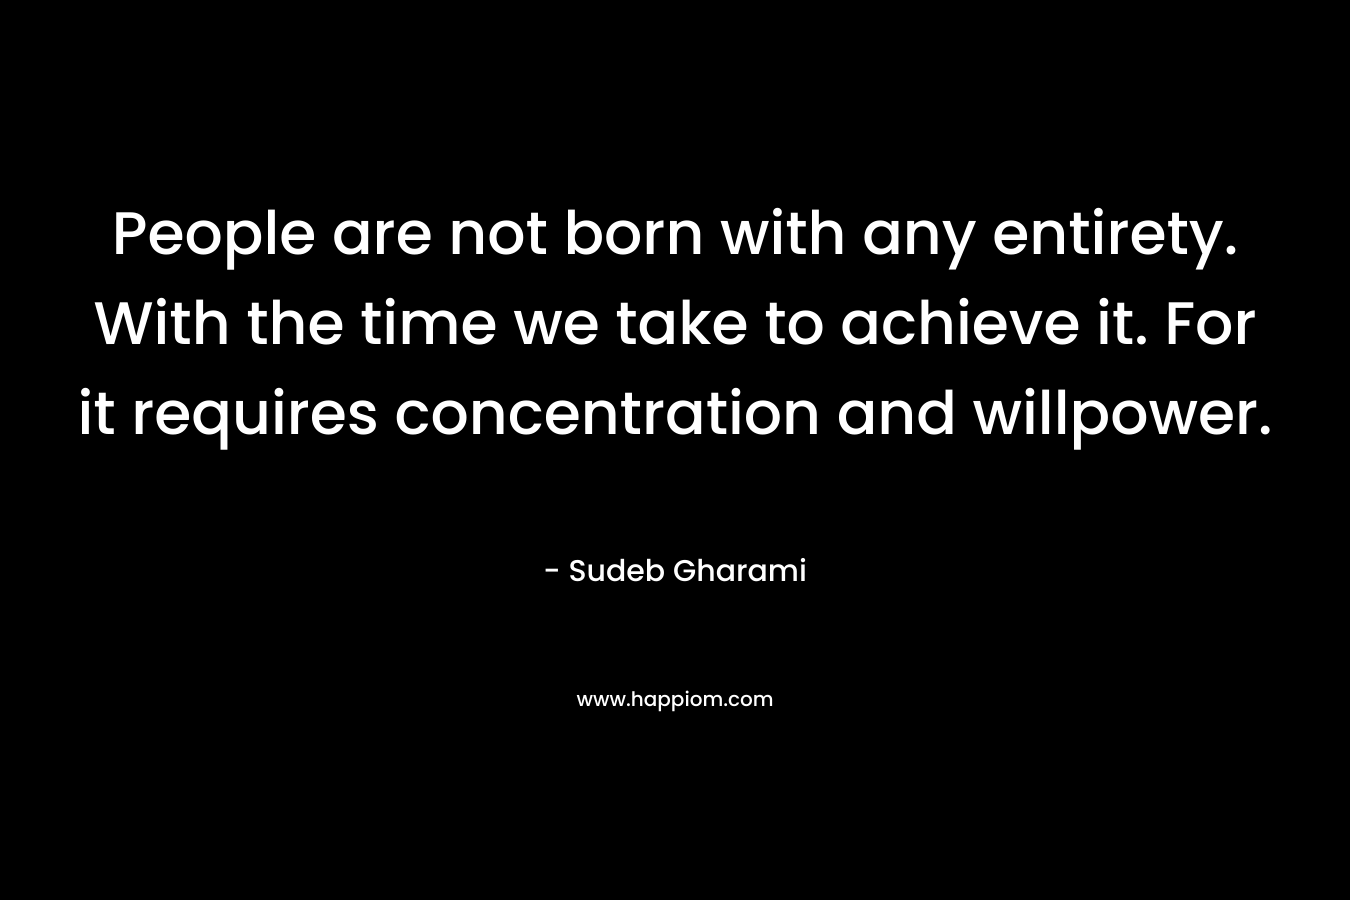 People are not born with any entirety. With the time we take to achieve it. For it requires concentration and willpower.